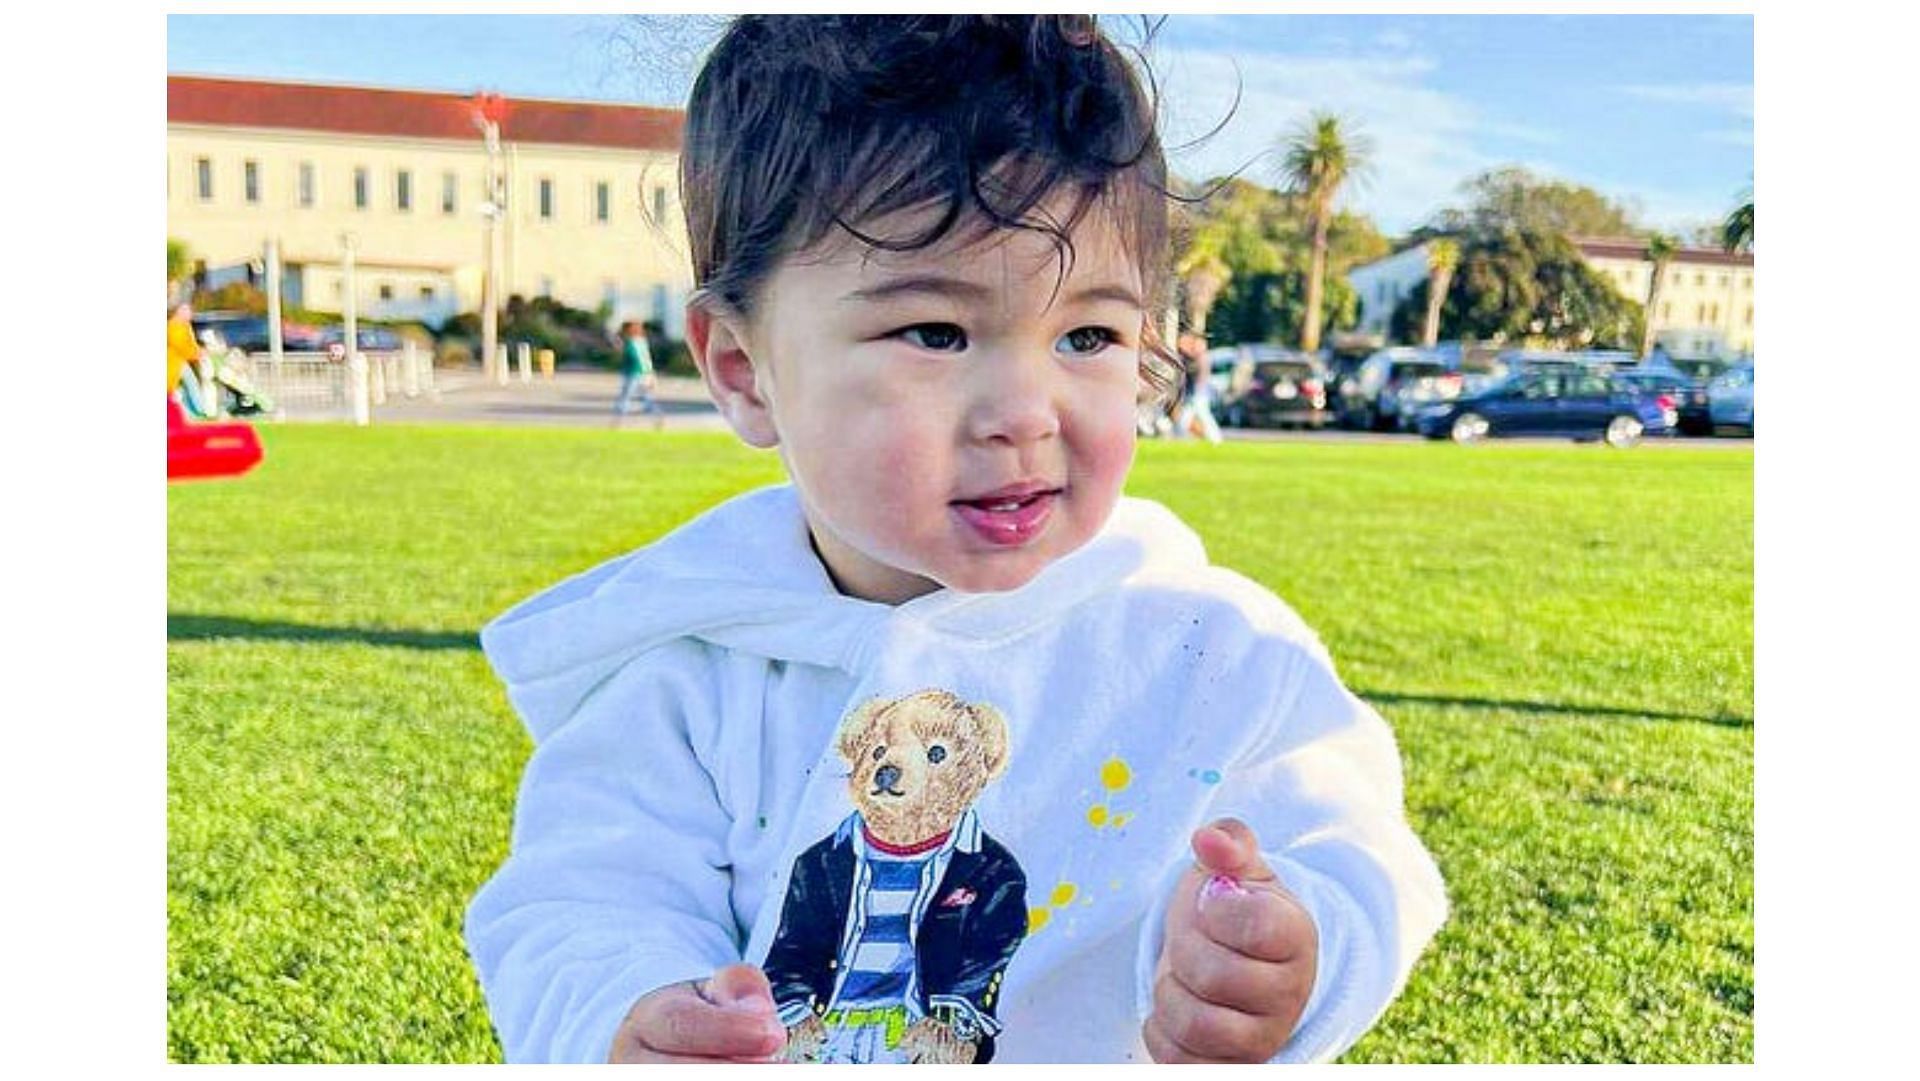 10-month-old toddler overdoses on fentanyl at local playground, (Image via @hknightsf/Twitter)